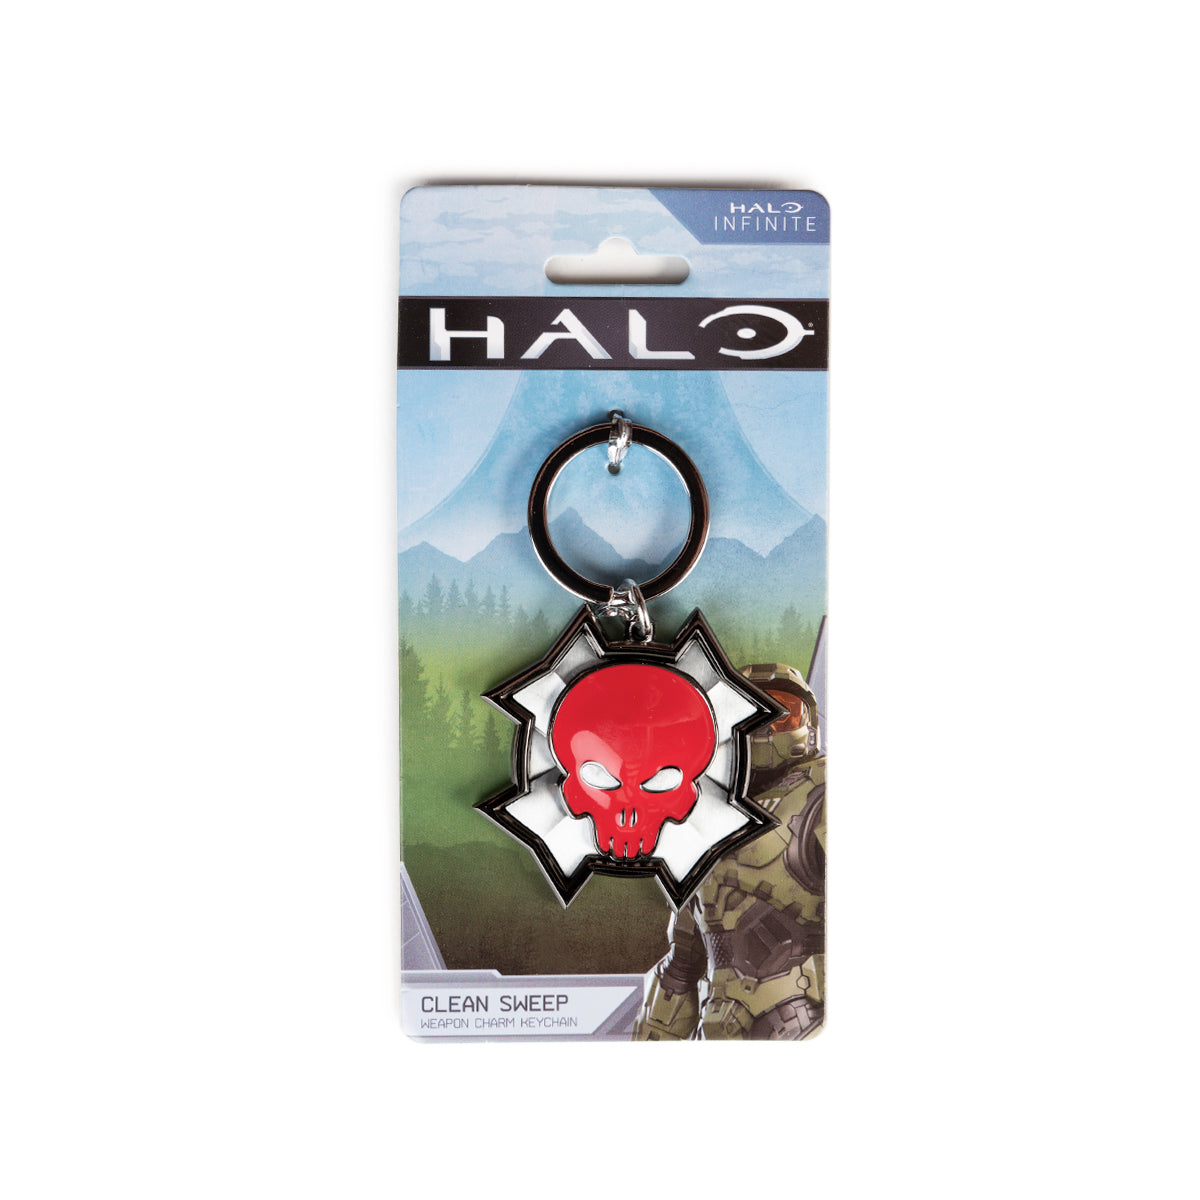 Halo Video Game Lanyard Keychain w/ 2 Master Chief Rubber Charm :  : Office Products